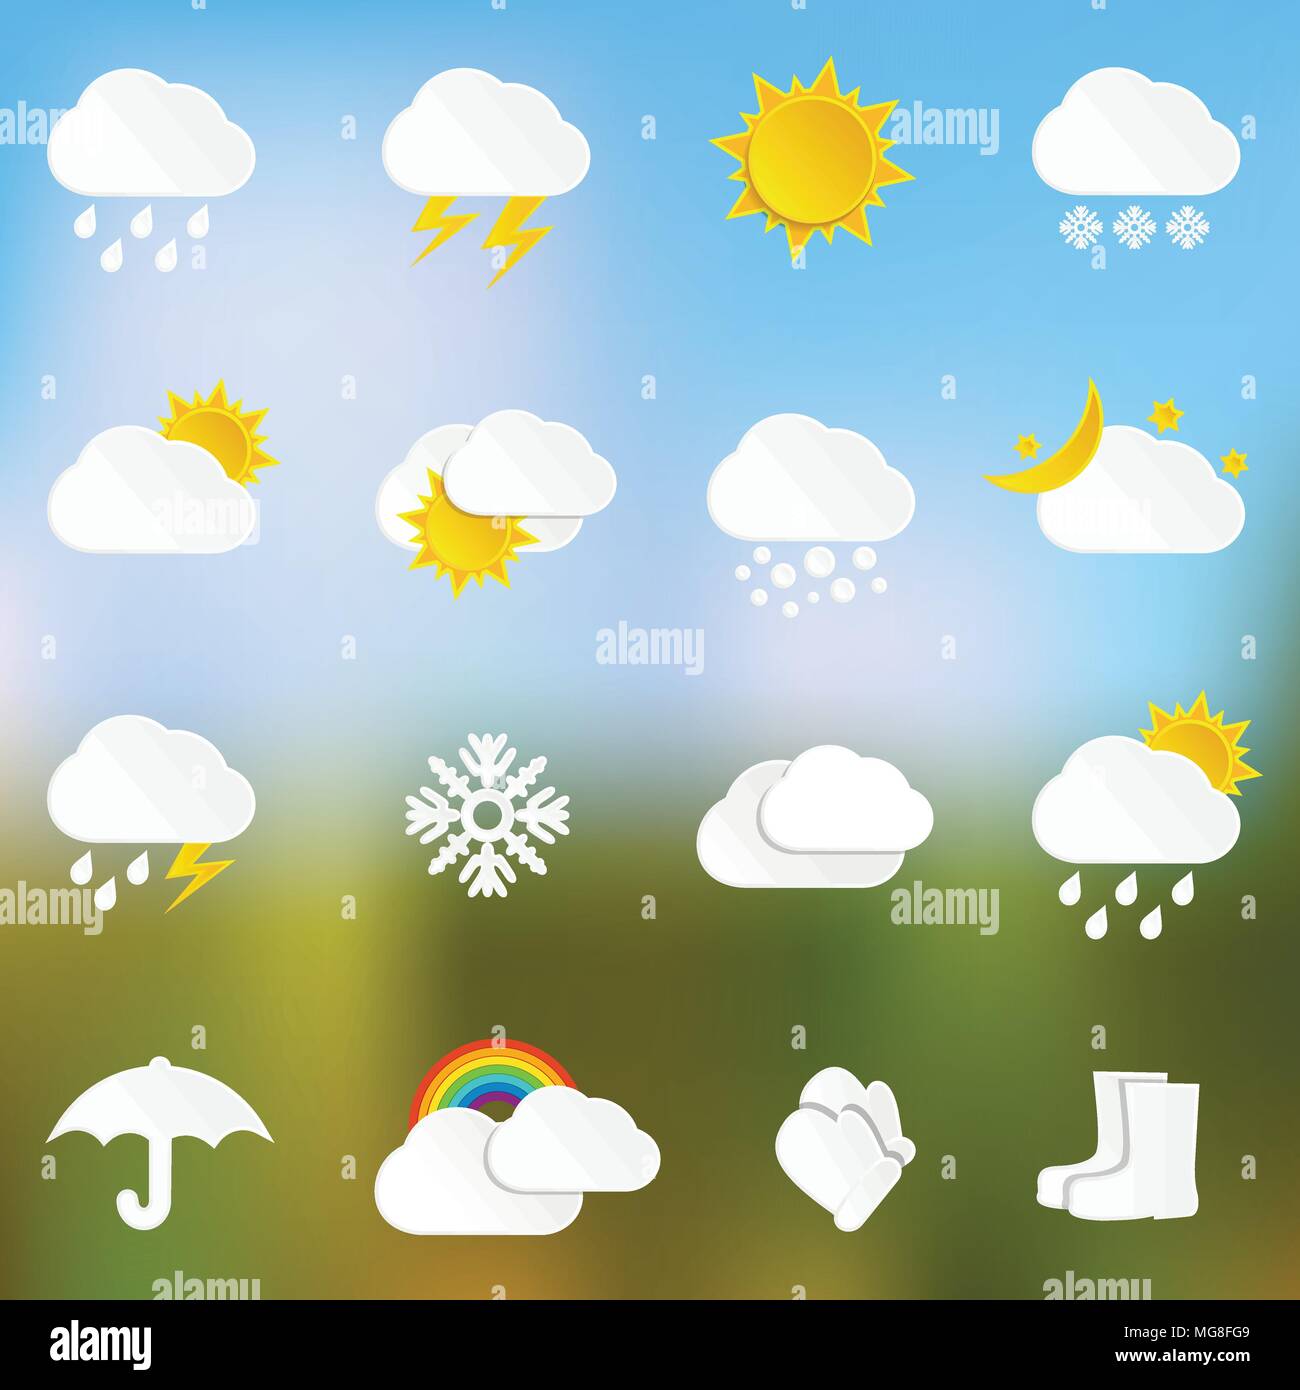 Abstract paper weather icons, paper art style. Vector illustration. Stock Vector